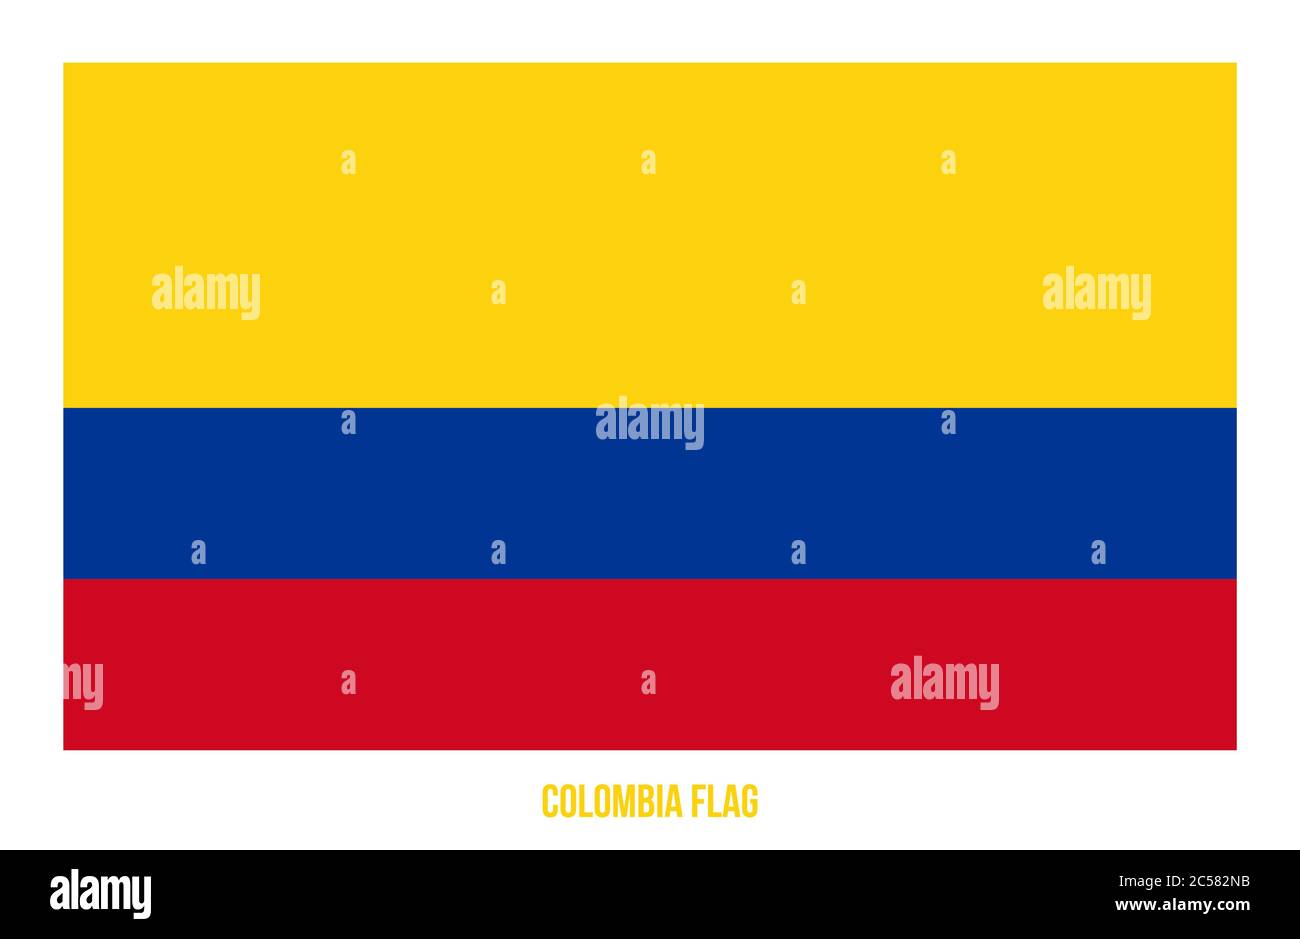 Colombia Flag Vector Illustration on White Background. Colombia National Flag. Stock Vector